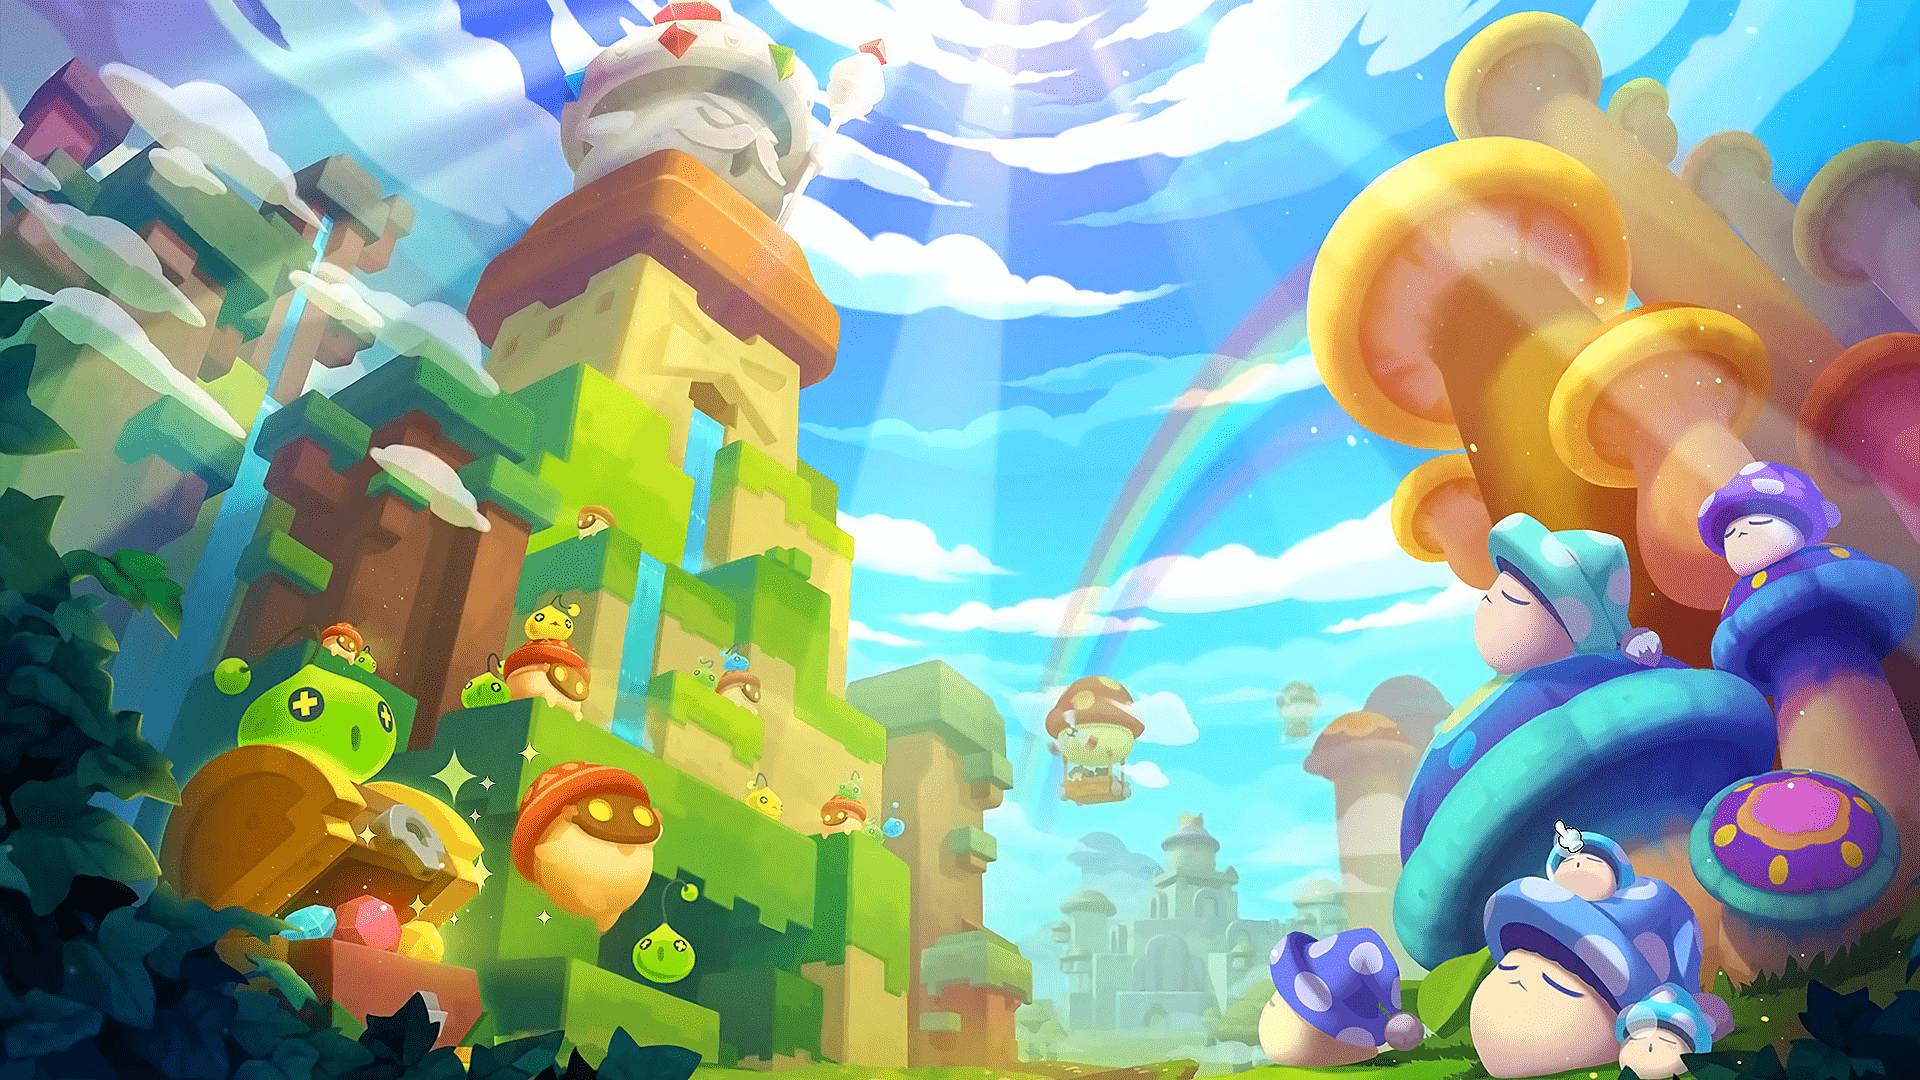 Maplestory 2 4k Wallpapers Top Free Maplestory 2 4k Backgrounds Wallpaperaccess